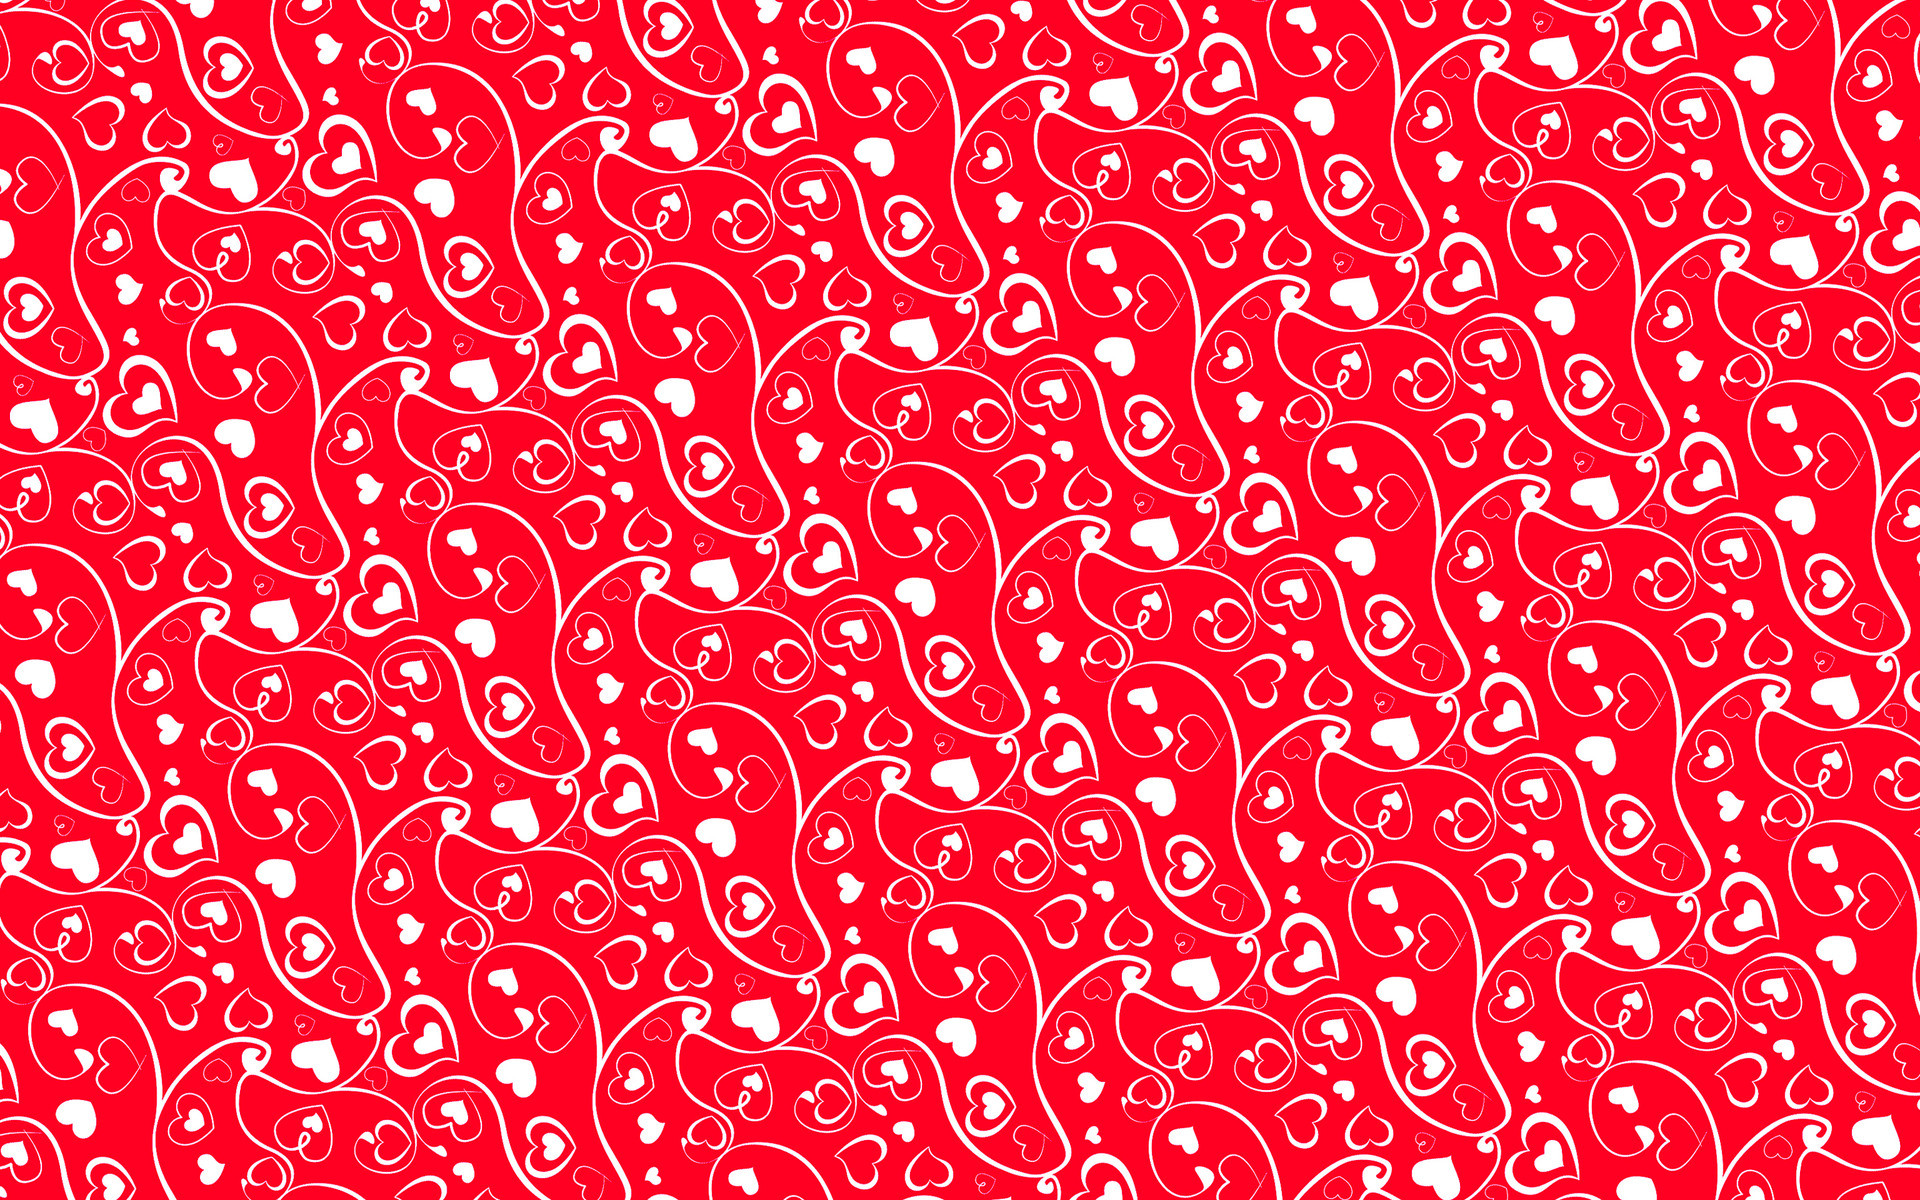 1920x1200 Red heart and swirl patterns backgrounds